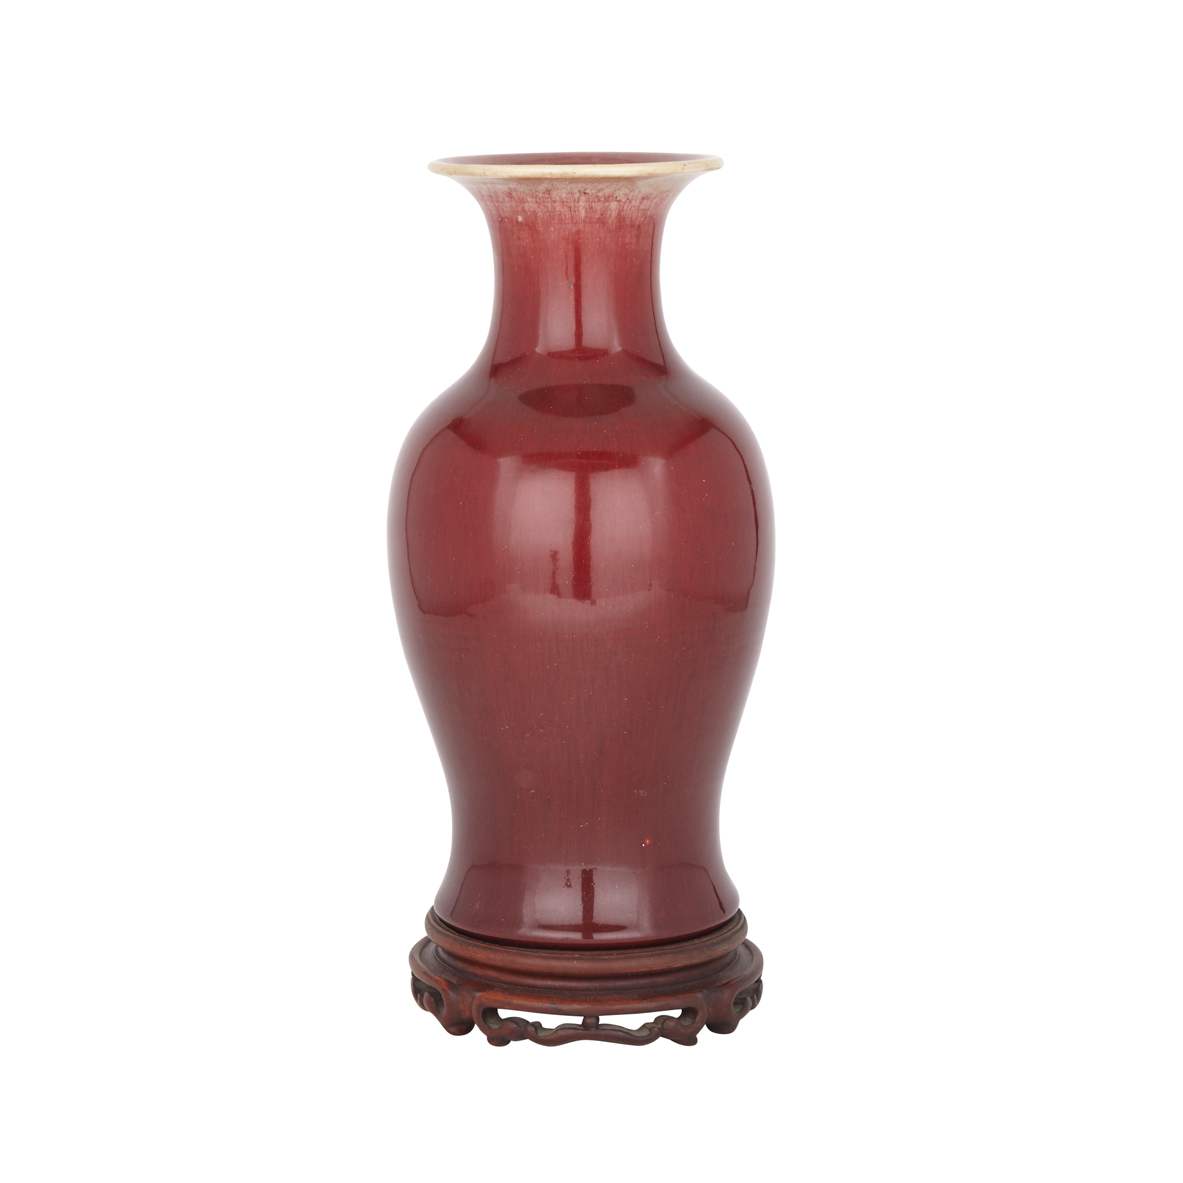 A Chinese Copper Red-Glazed Baluster Vase, 18th/19th Century